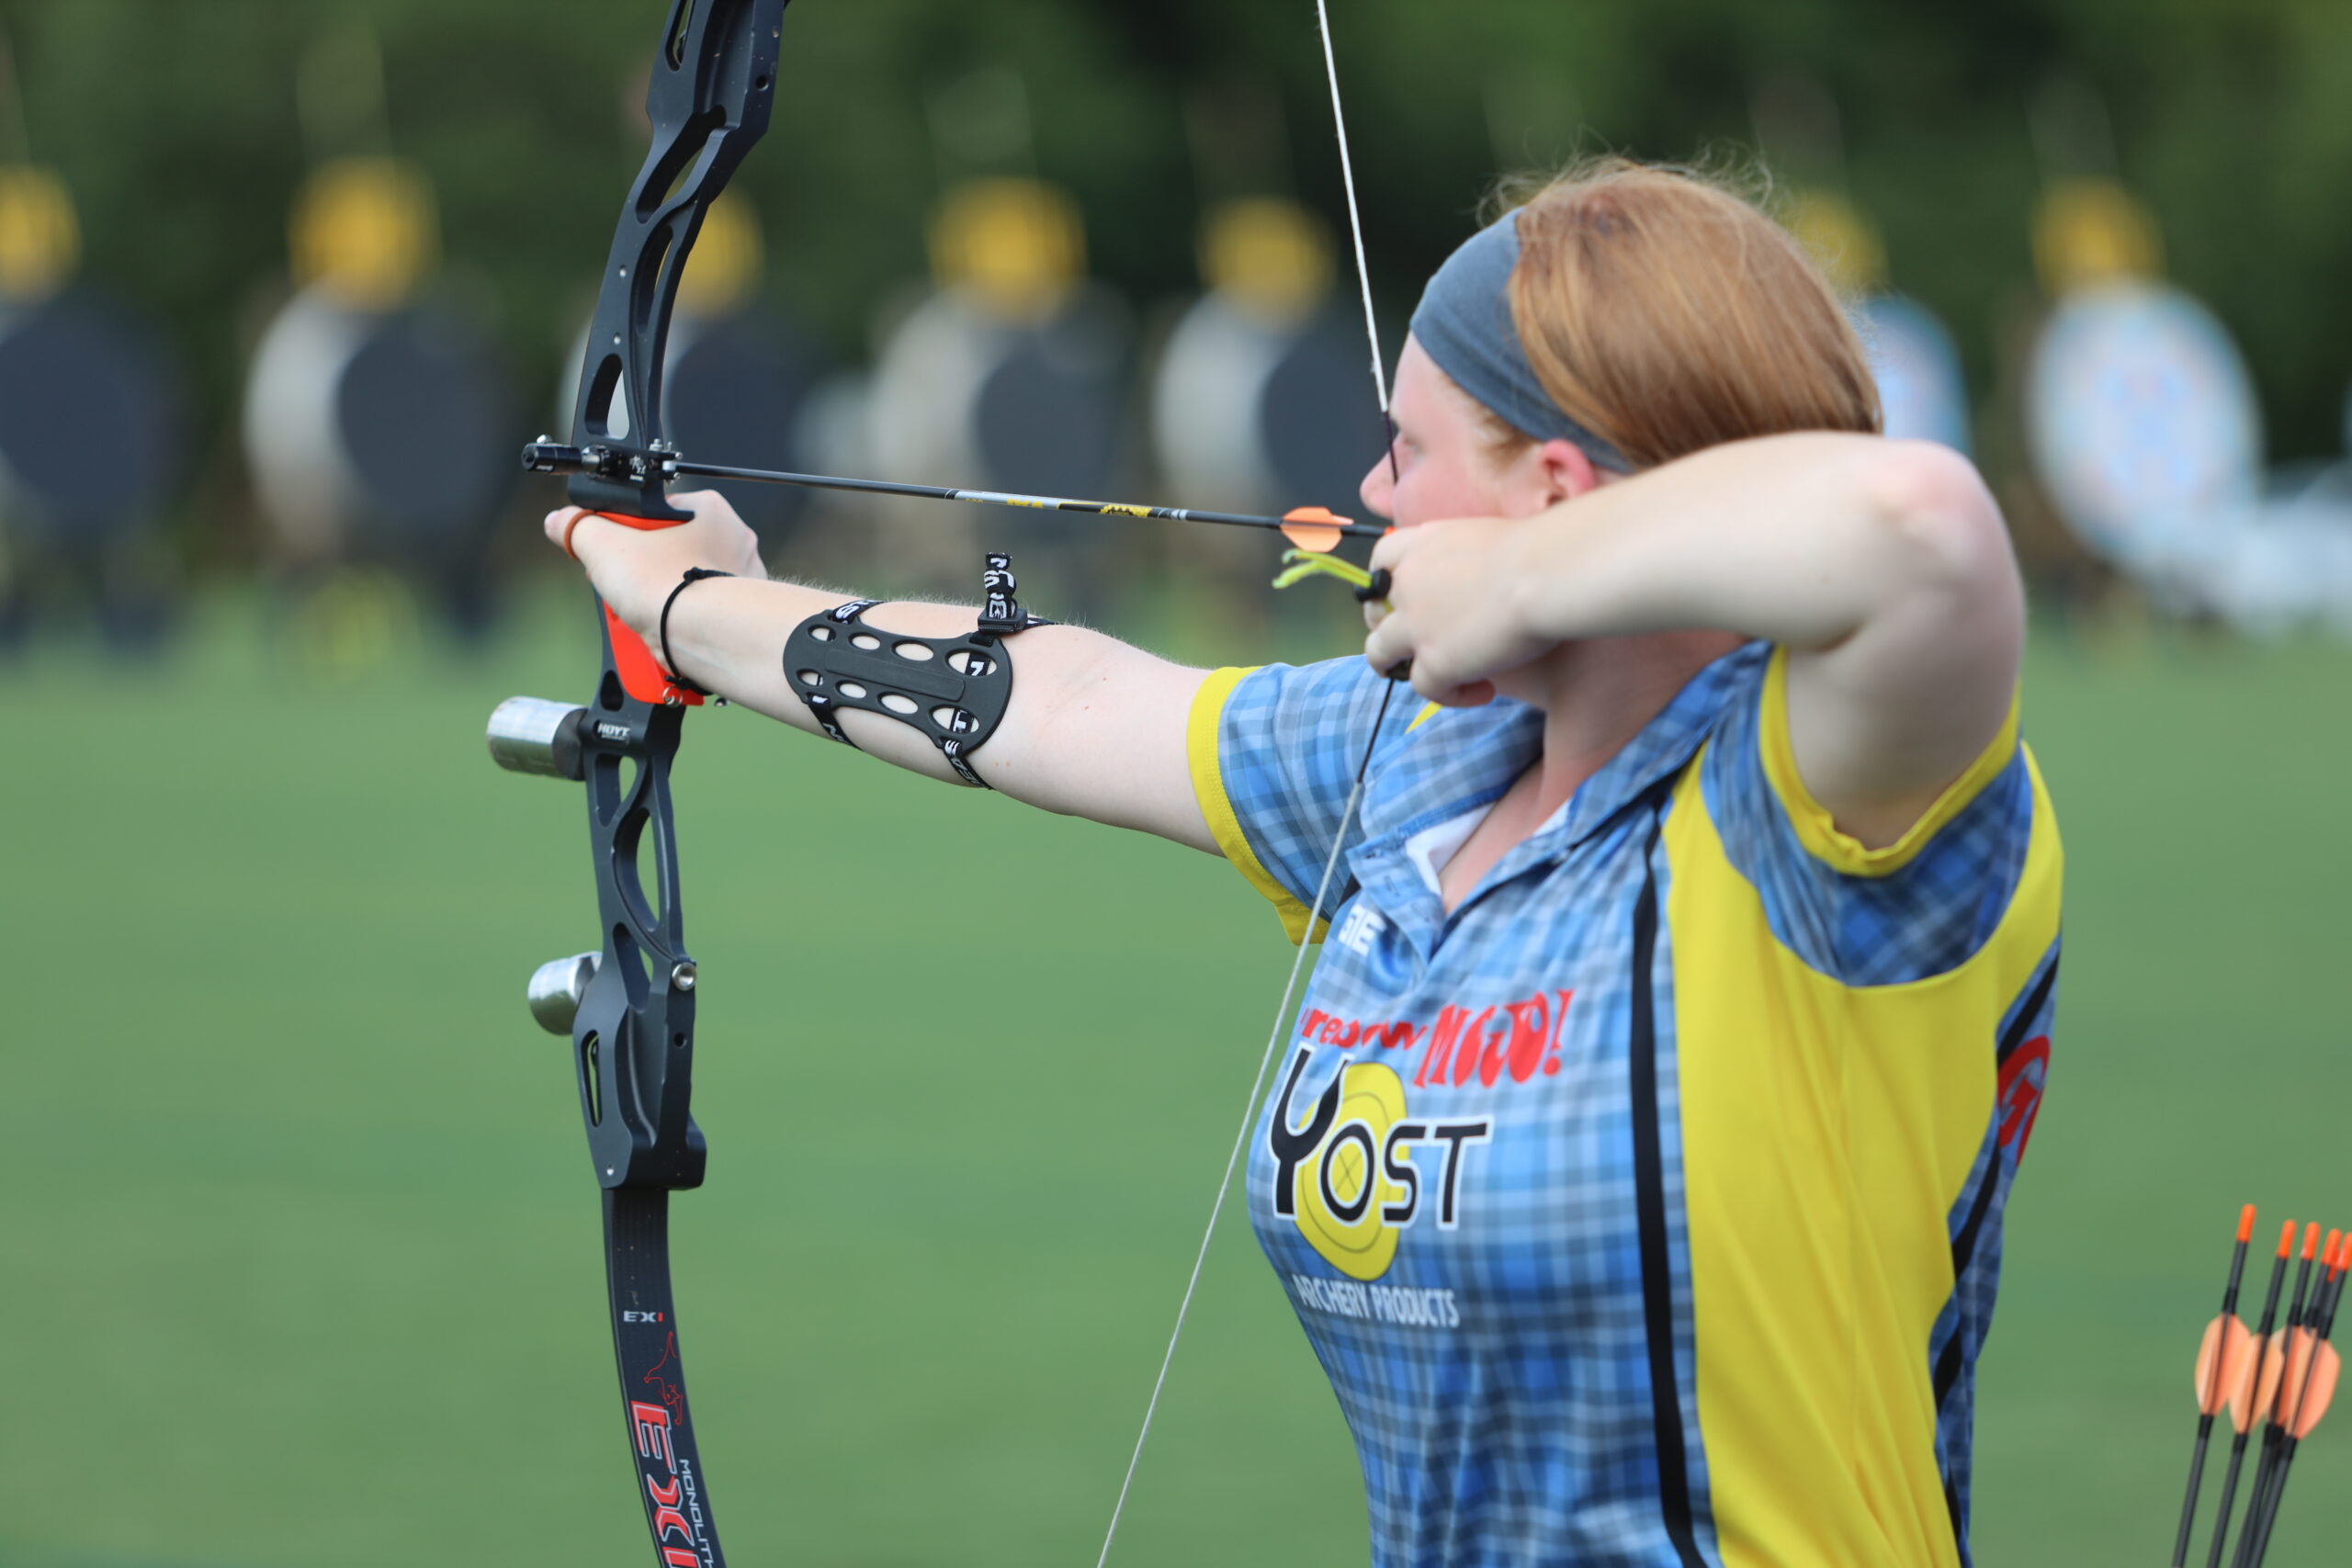 Like It Or Not, Barebow Archery is on the Rise